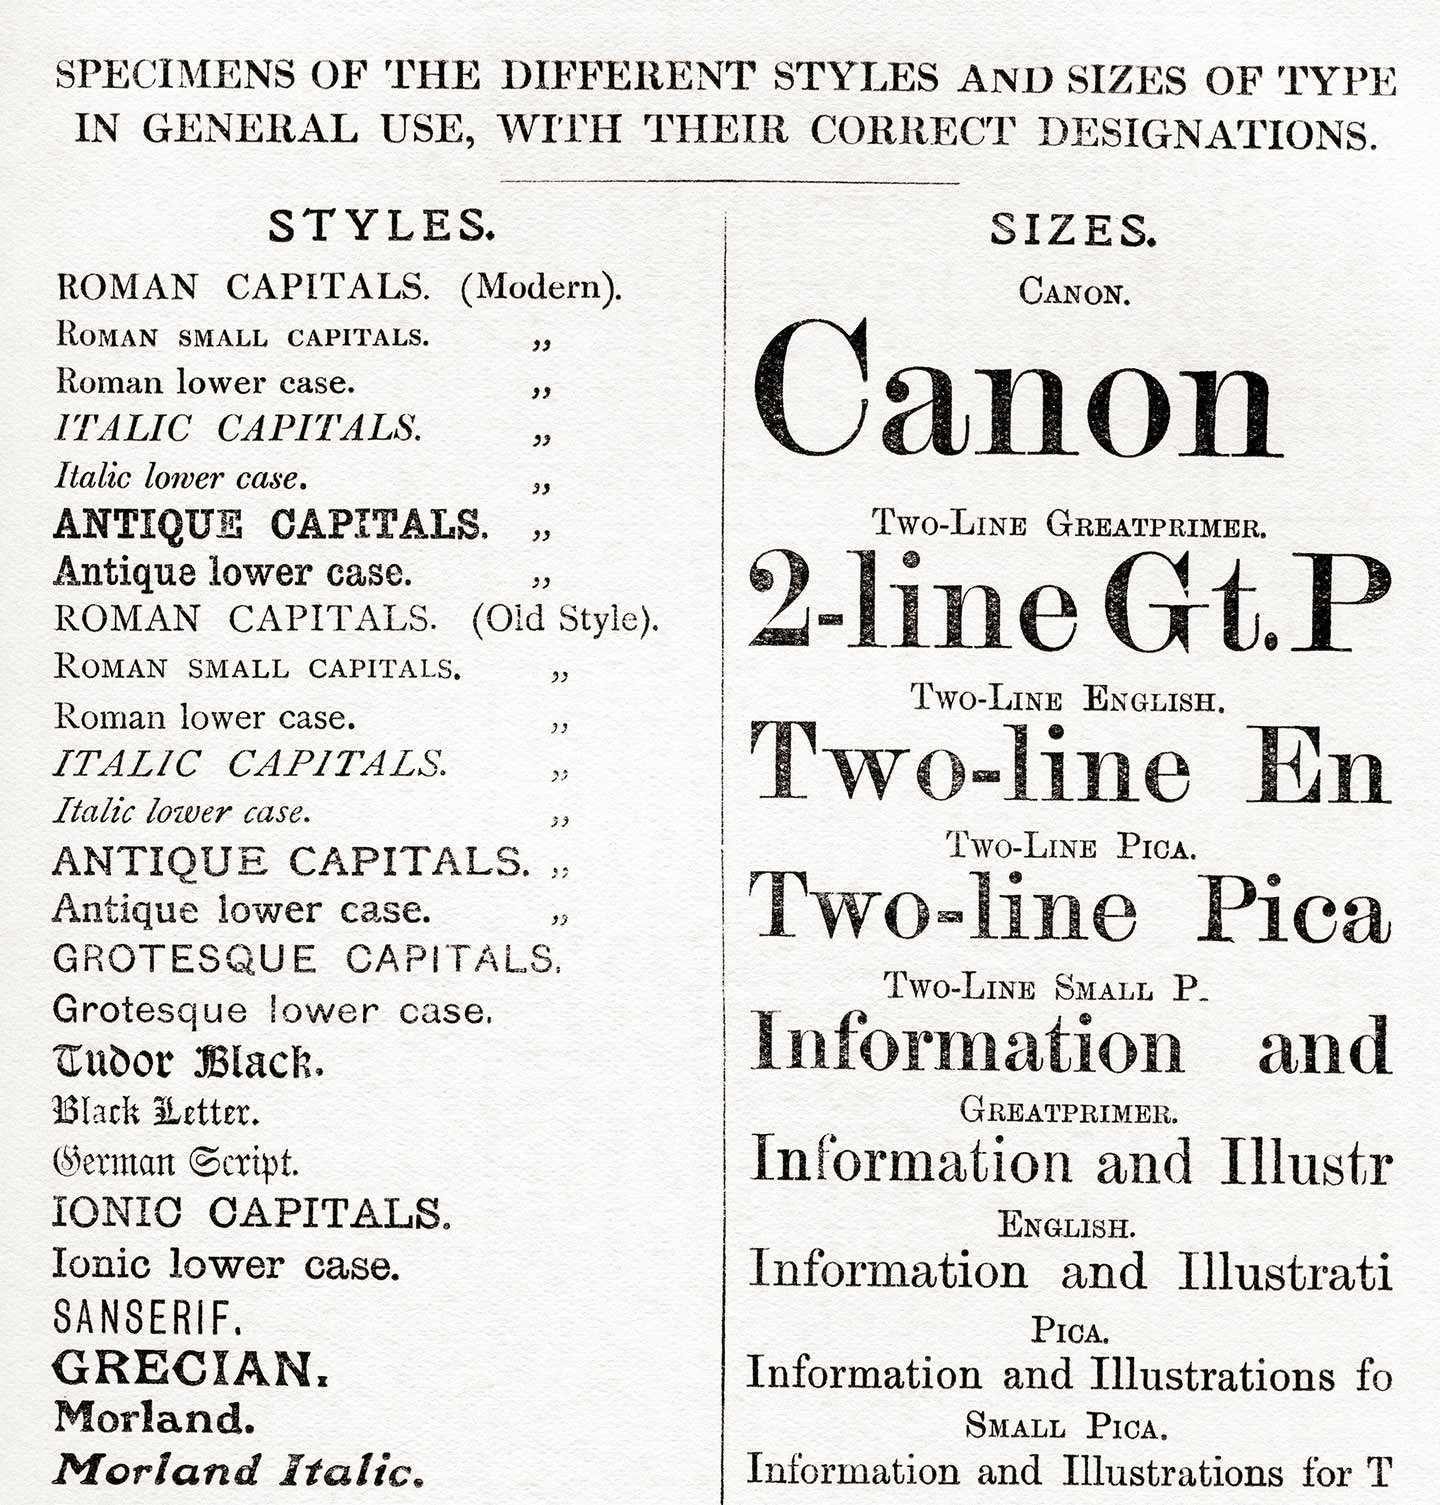 What Are Font Files? Learn History and How To Open